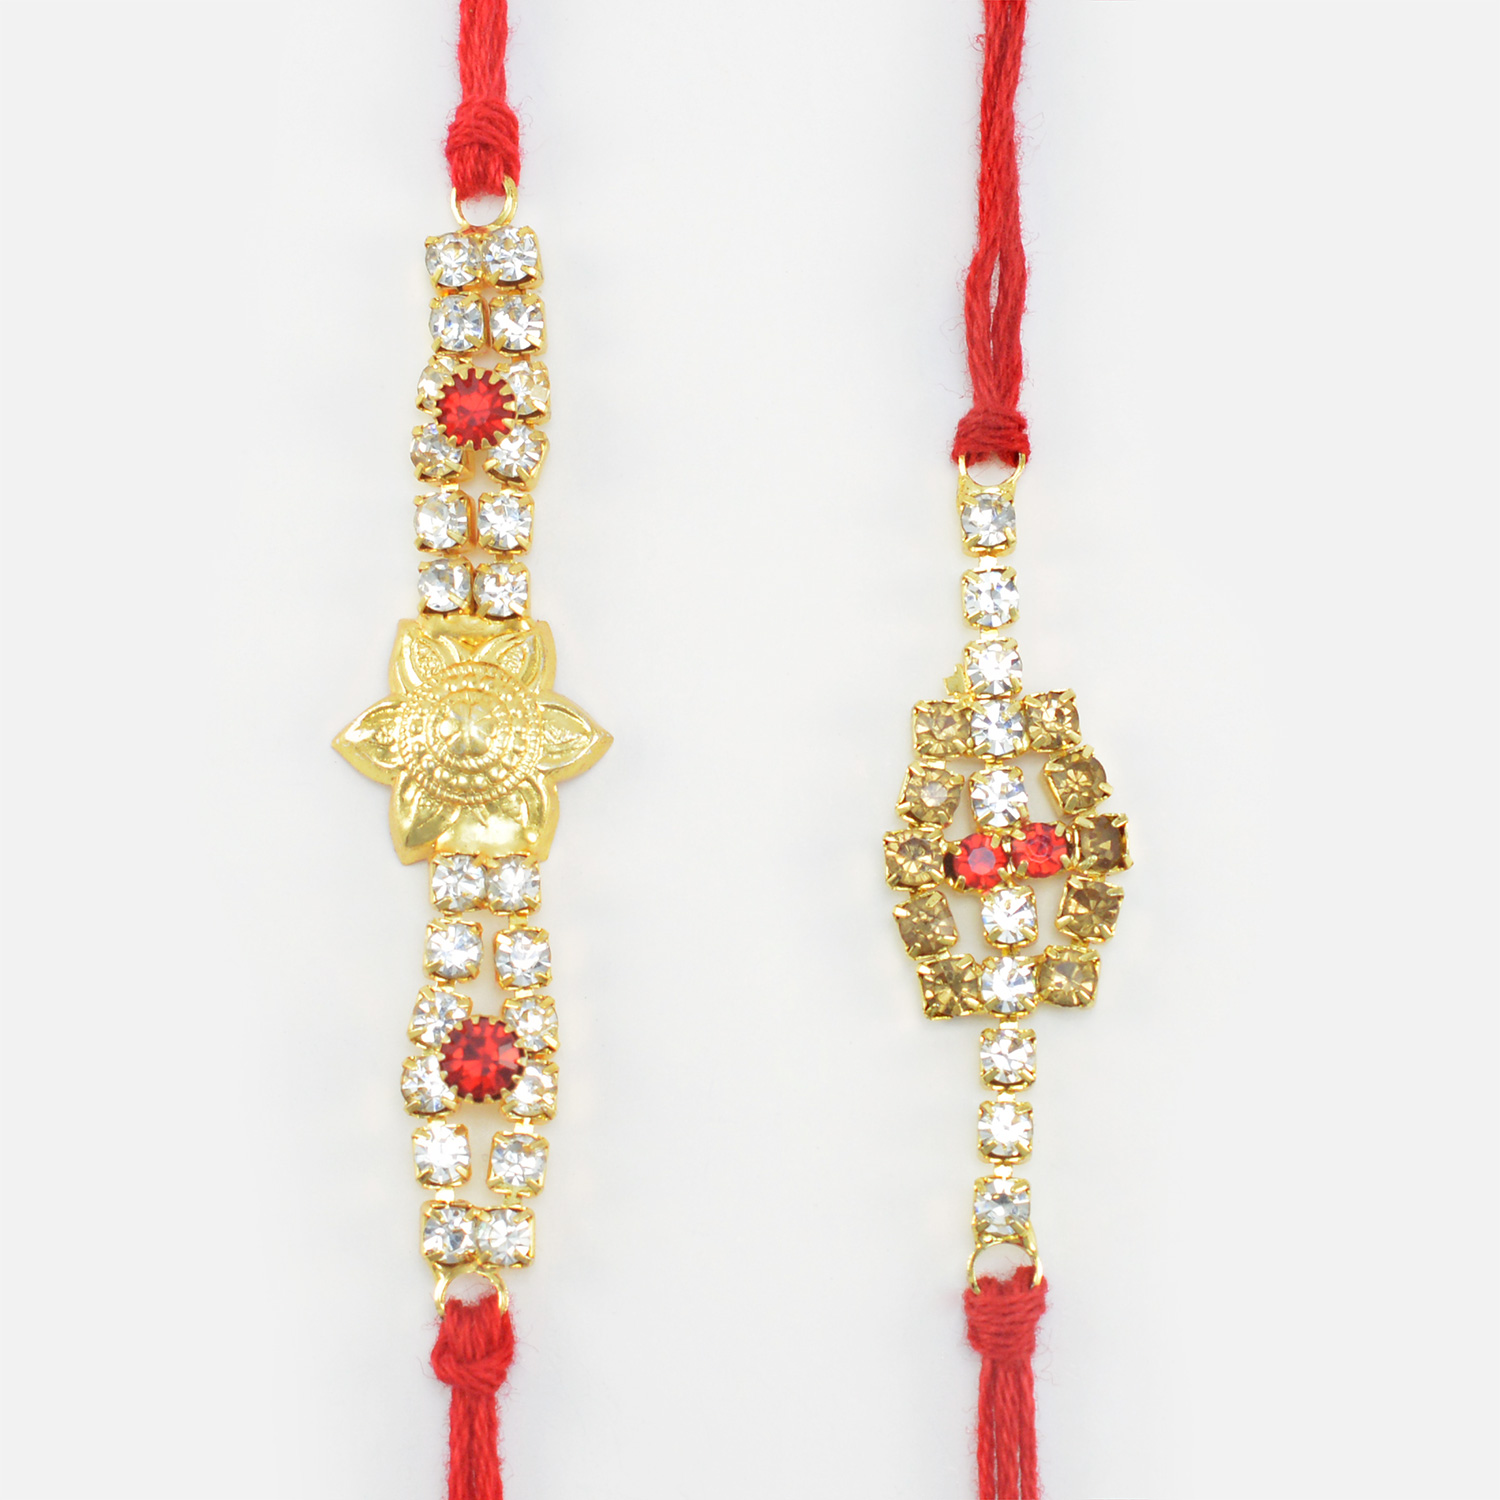 Golden Flower in Mid of Two Handcrafted Stone Dotted Mauli Rakhi Set 